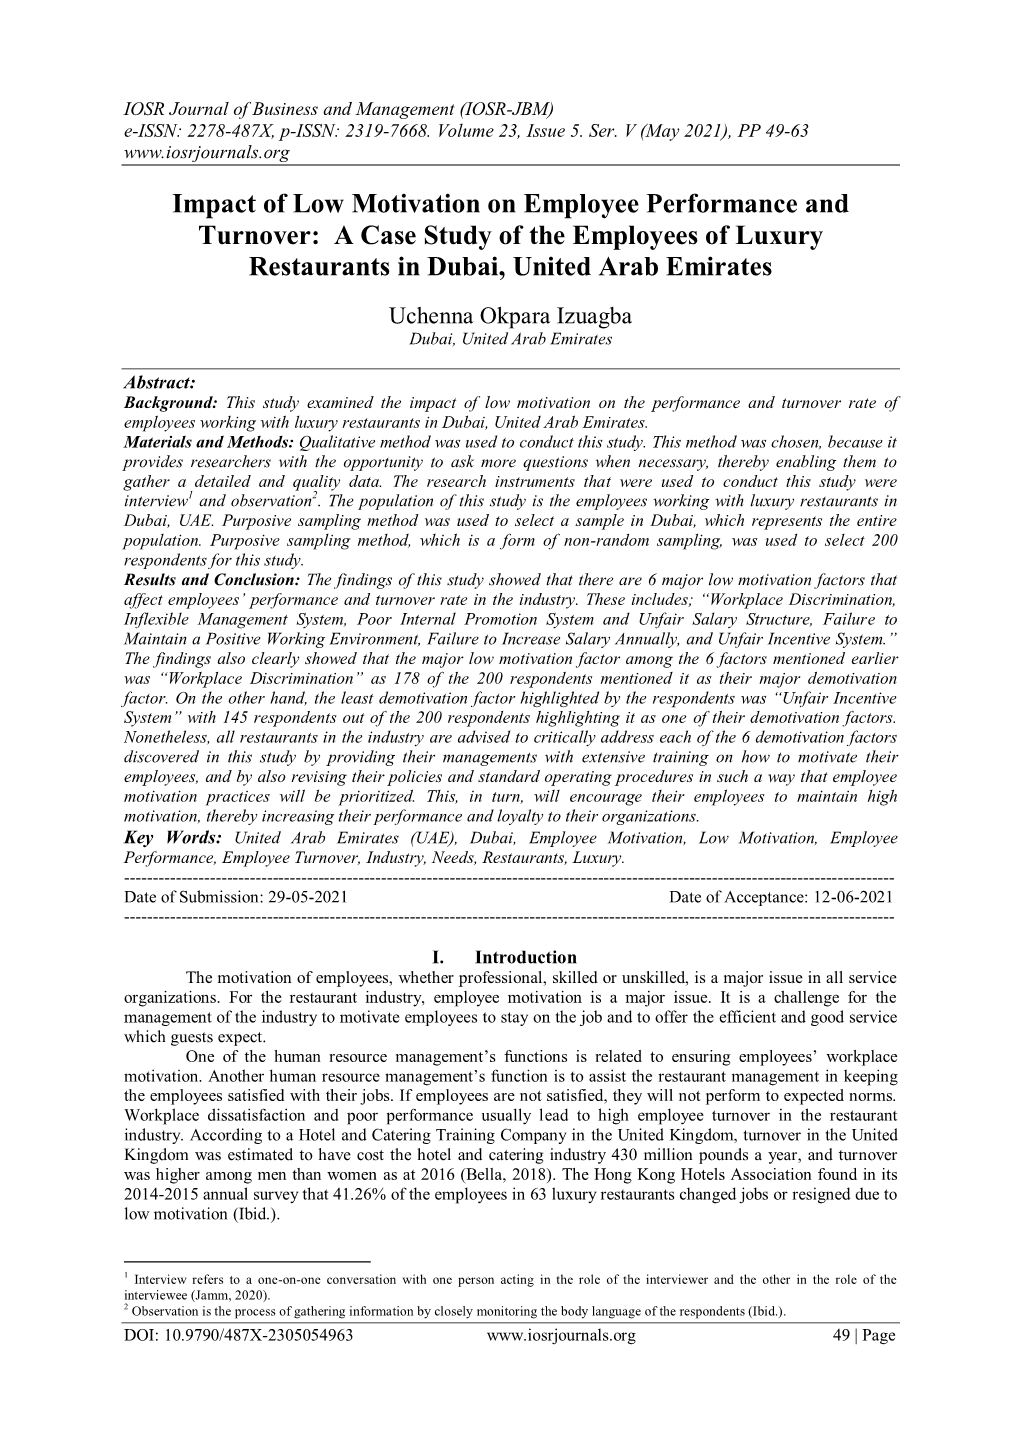 Impact of Low Motivation on Employee Performance and Turnover: a Case Study of the Employees of Luxury Restaurants in Dubai, United Arab Emirates